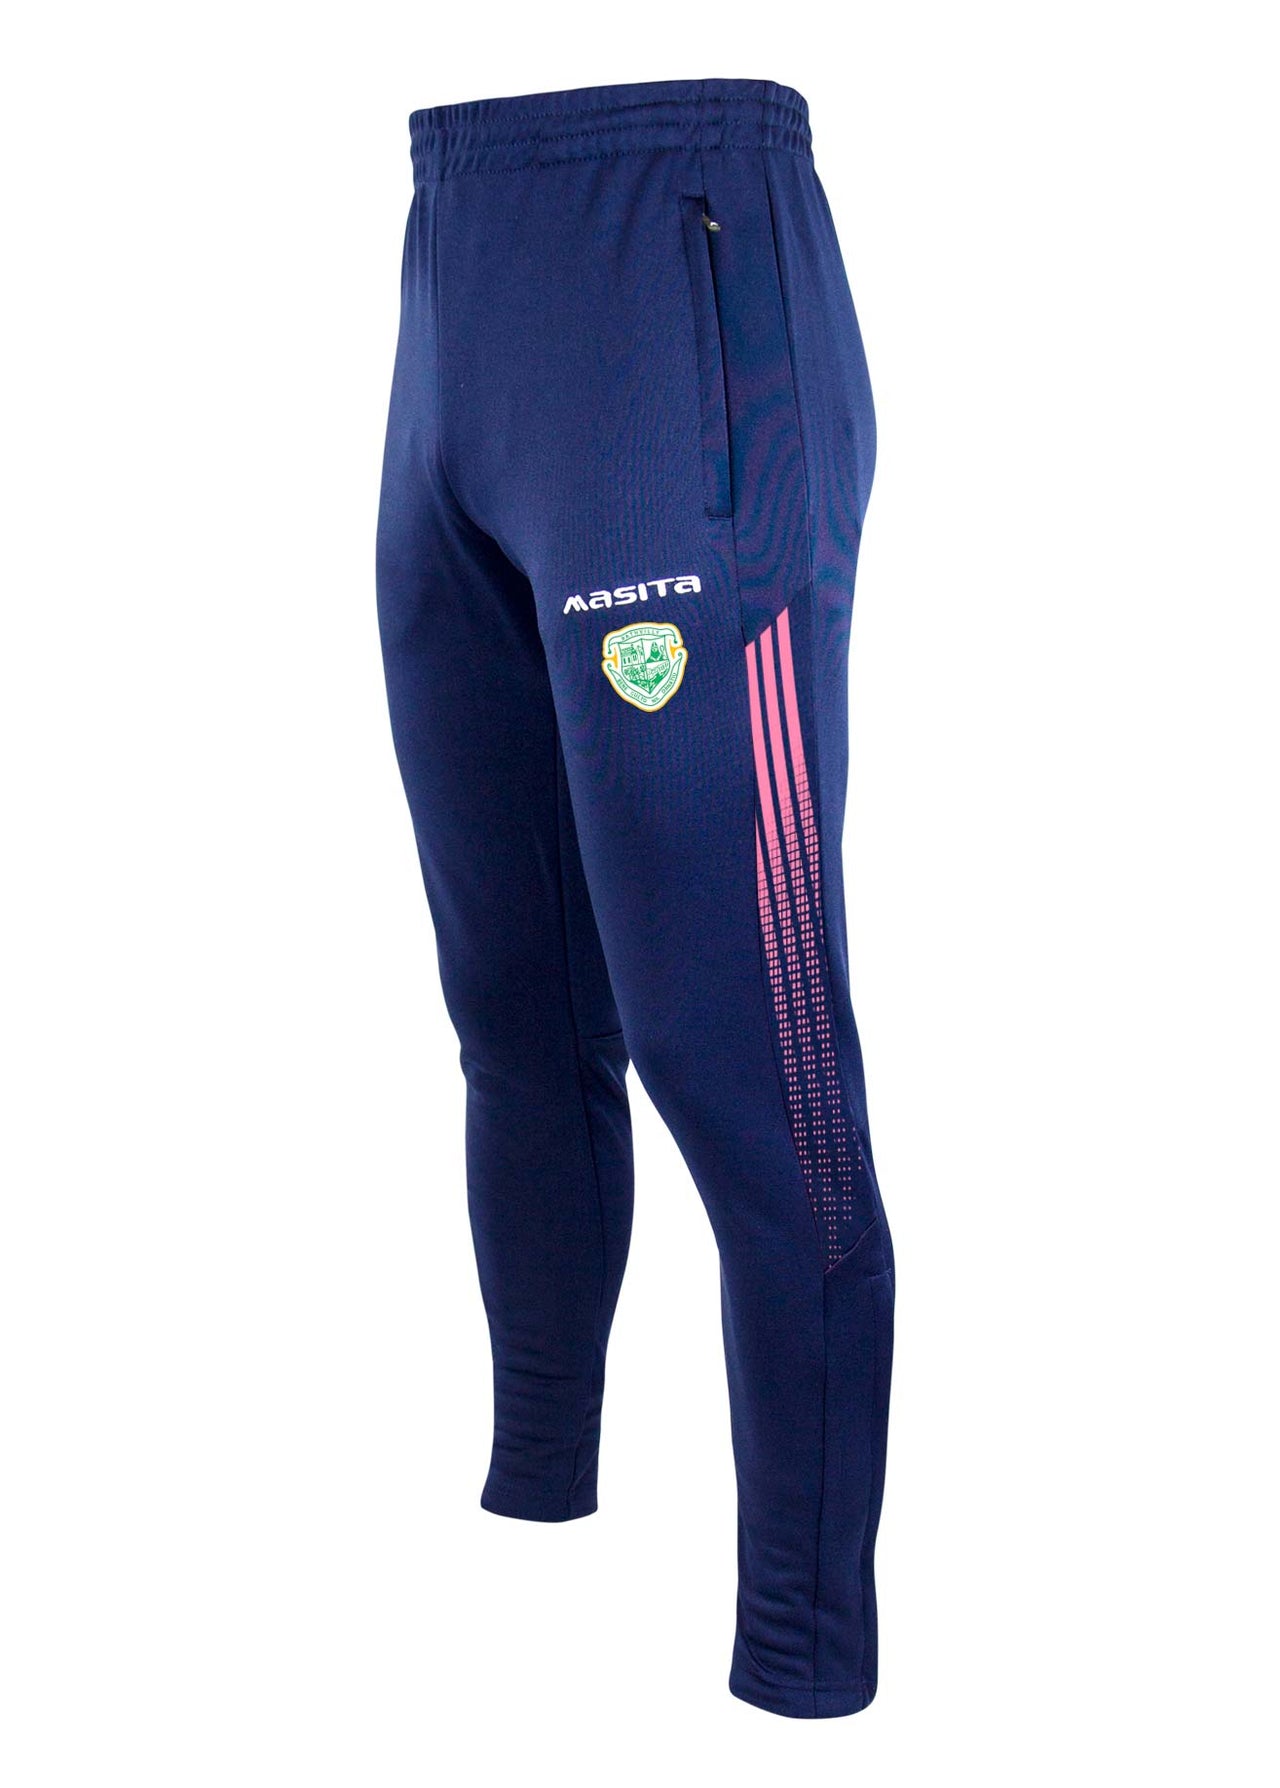 Rathvilly GAA Pink Skinny Bottoms Adults